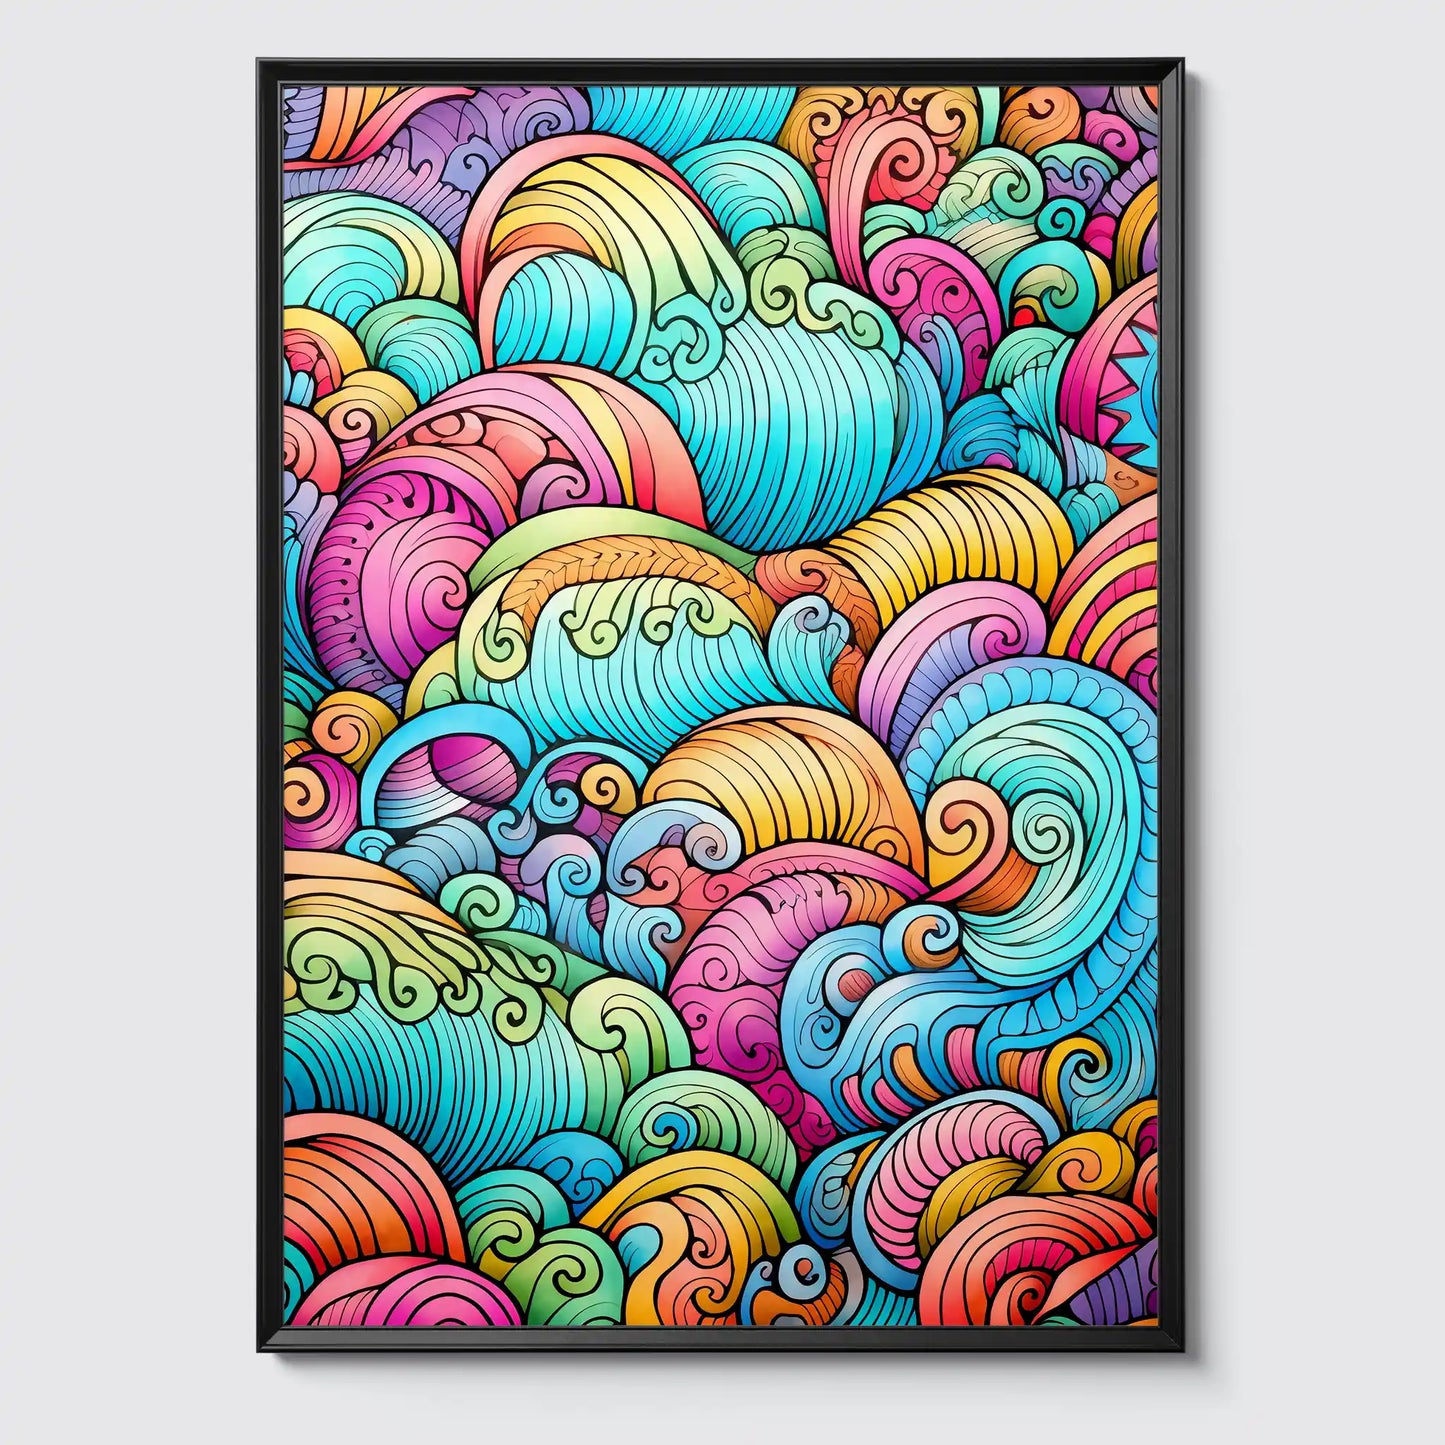 Doodle Pattern No 3 - Colorful - Sketch - Poster